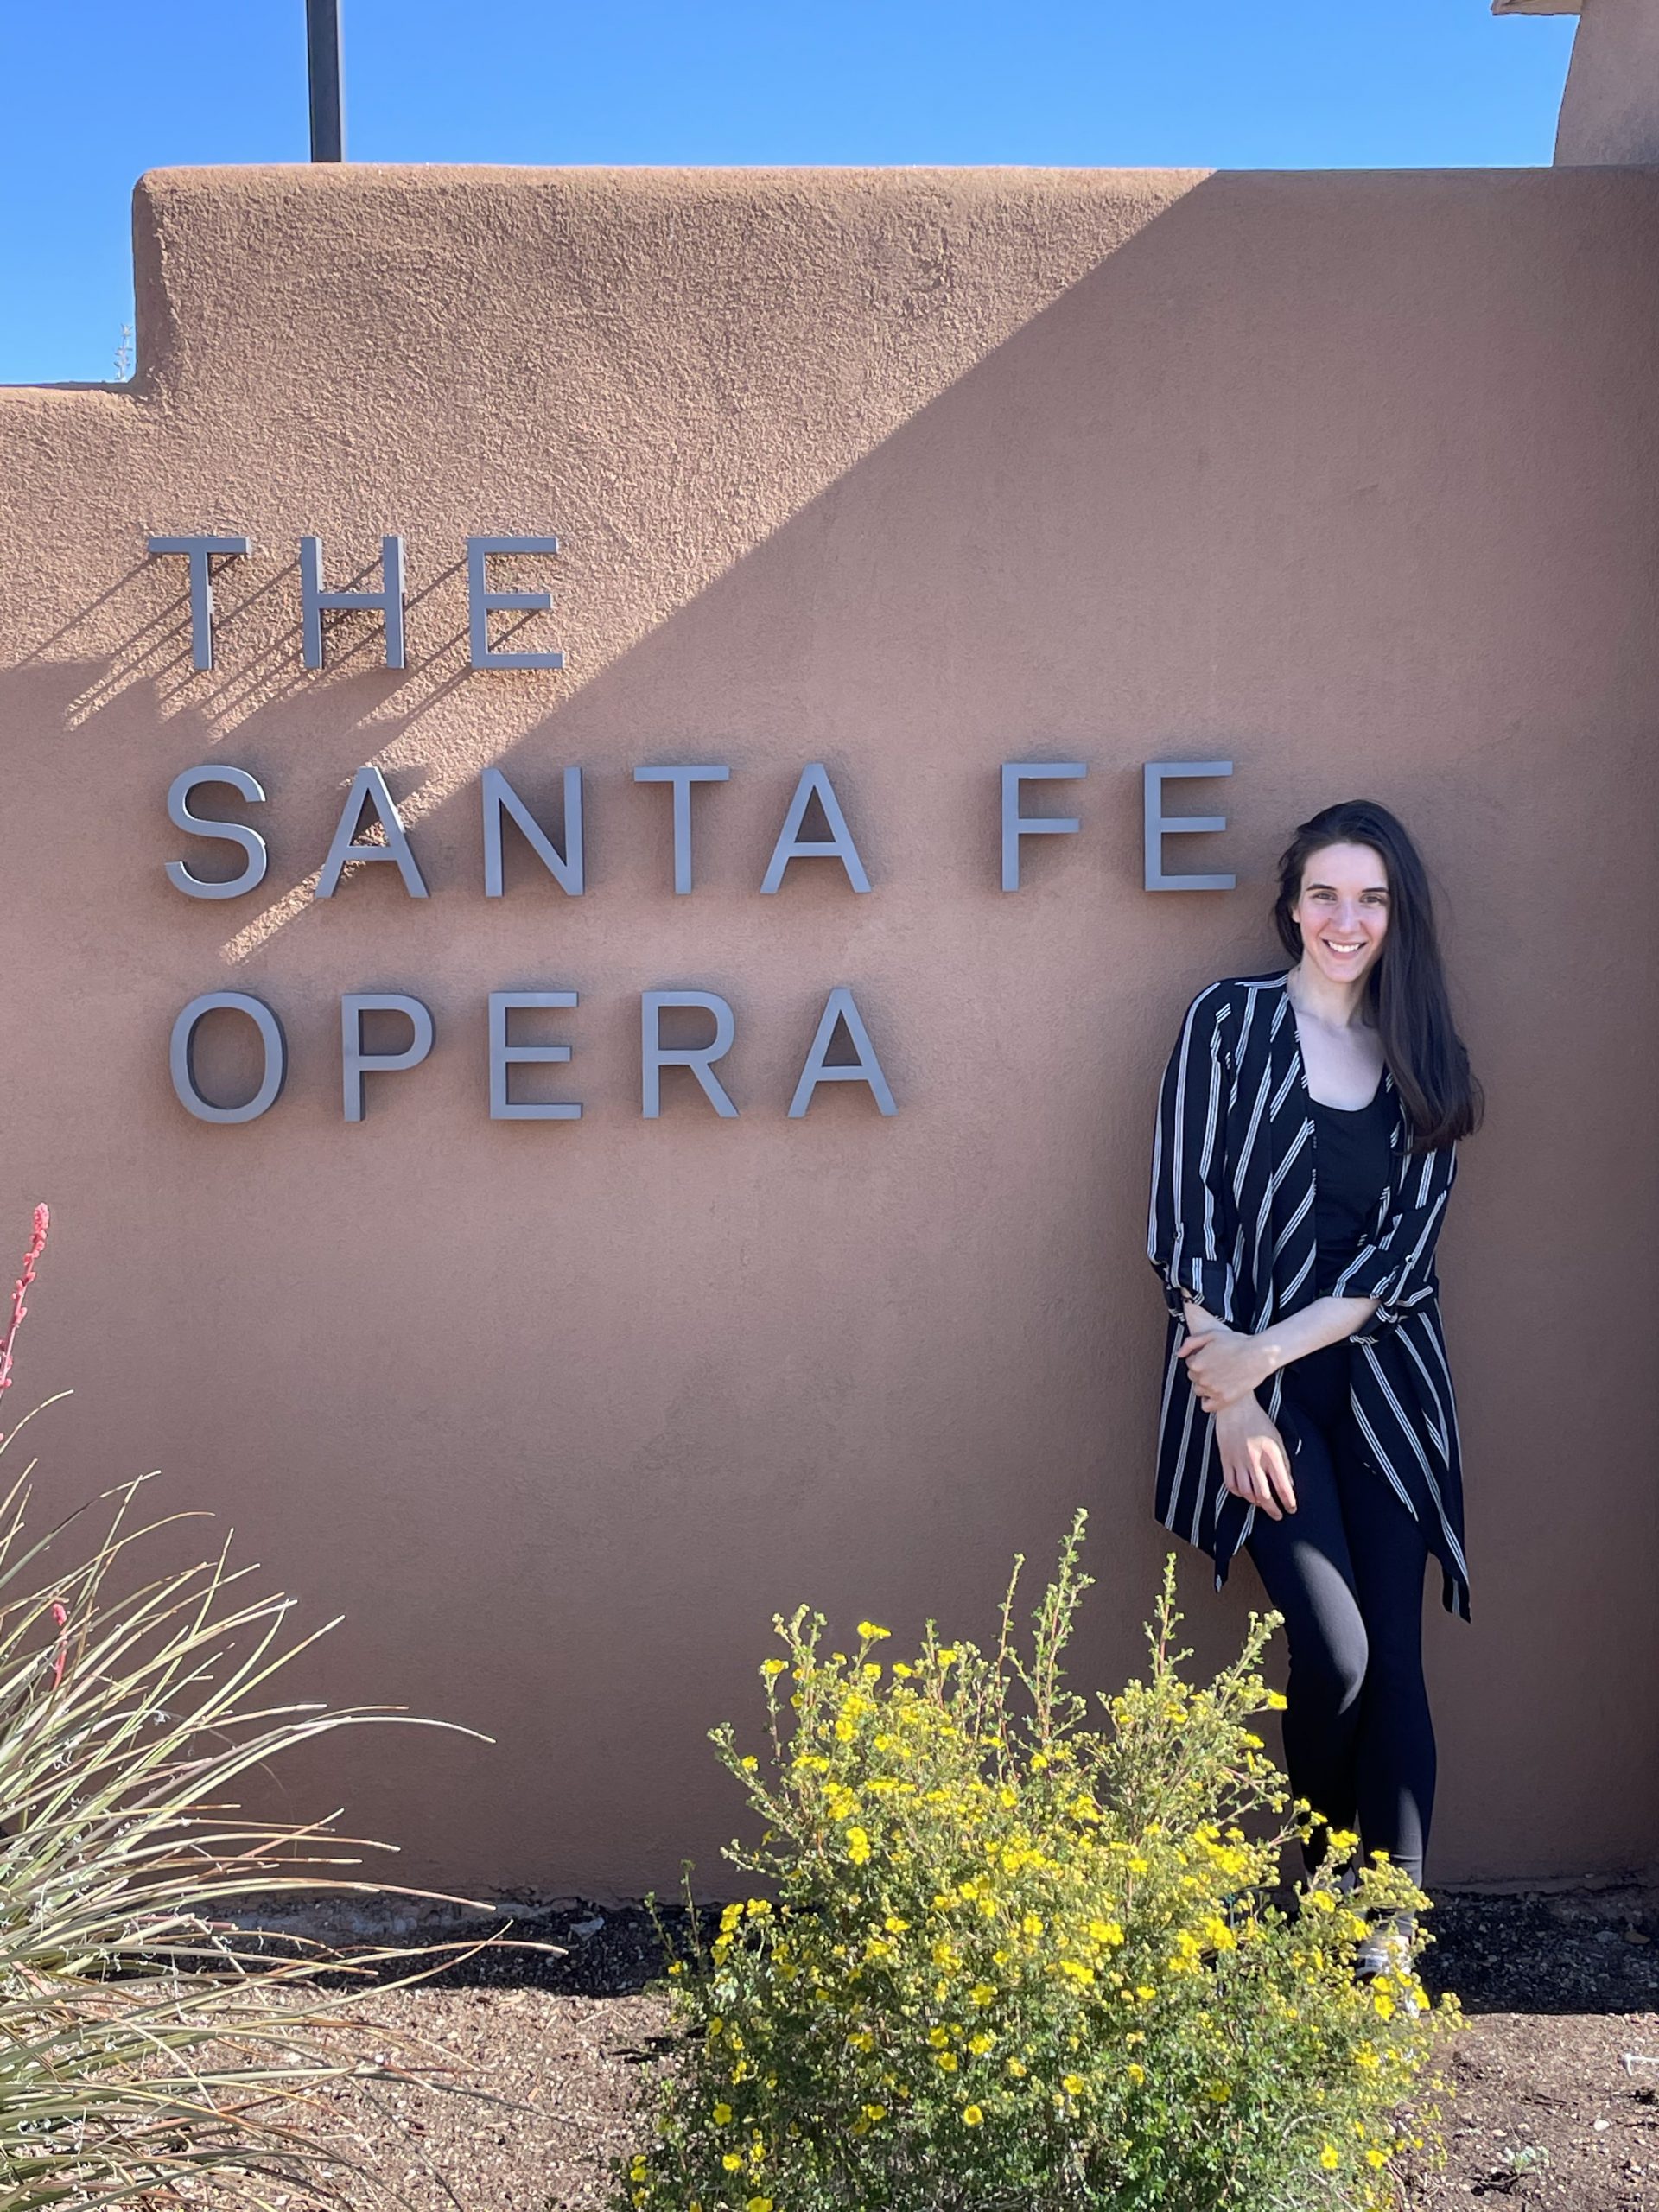 NEWS: Santa Fe Opera Apprentice Singers to Perform the 'Four Lovers' in Britten's A Midsummer Night's Dream